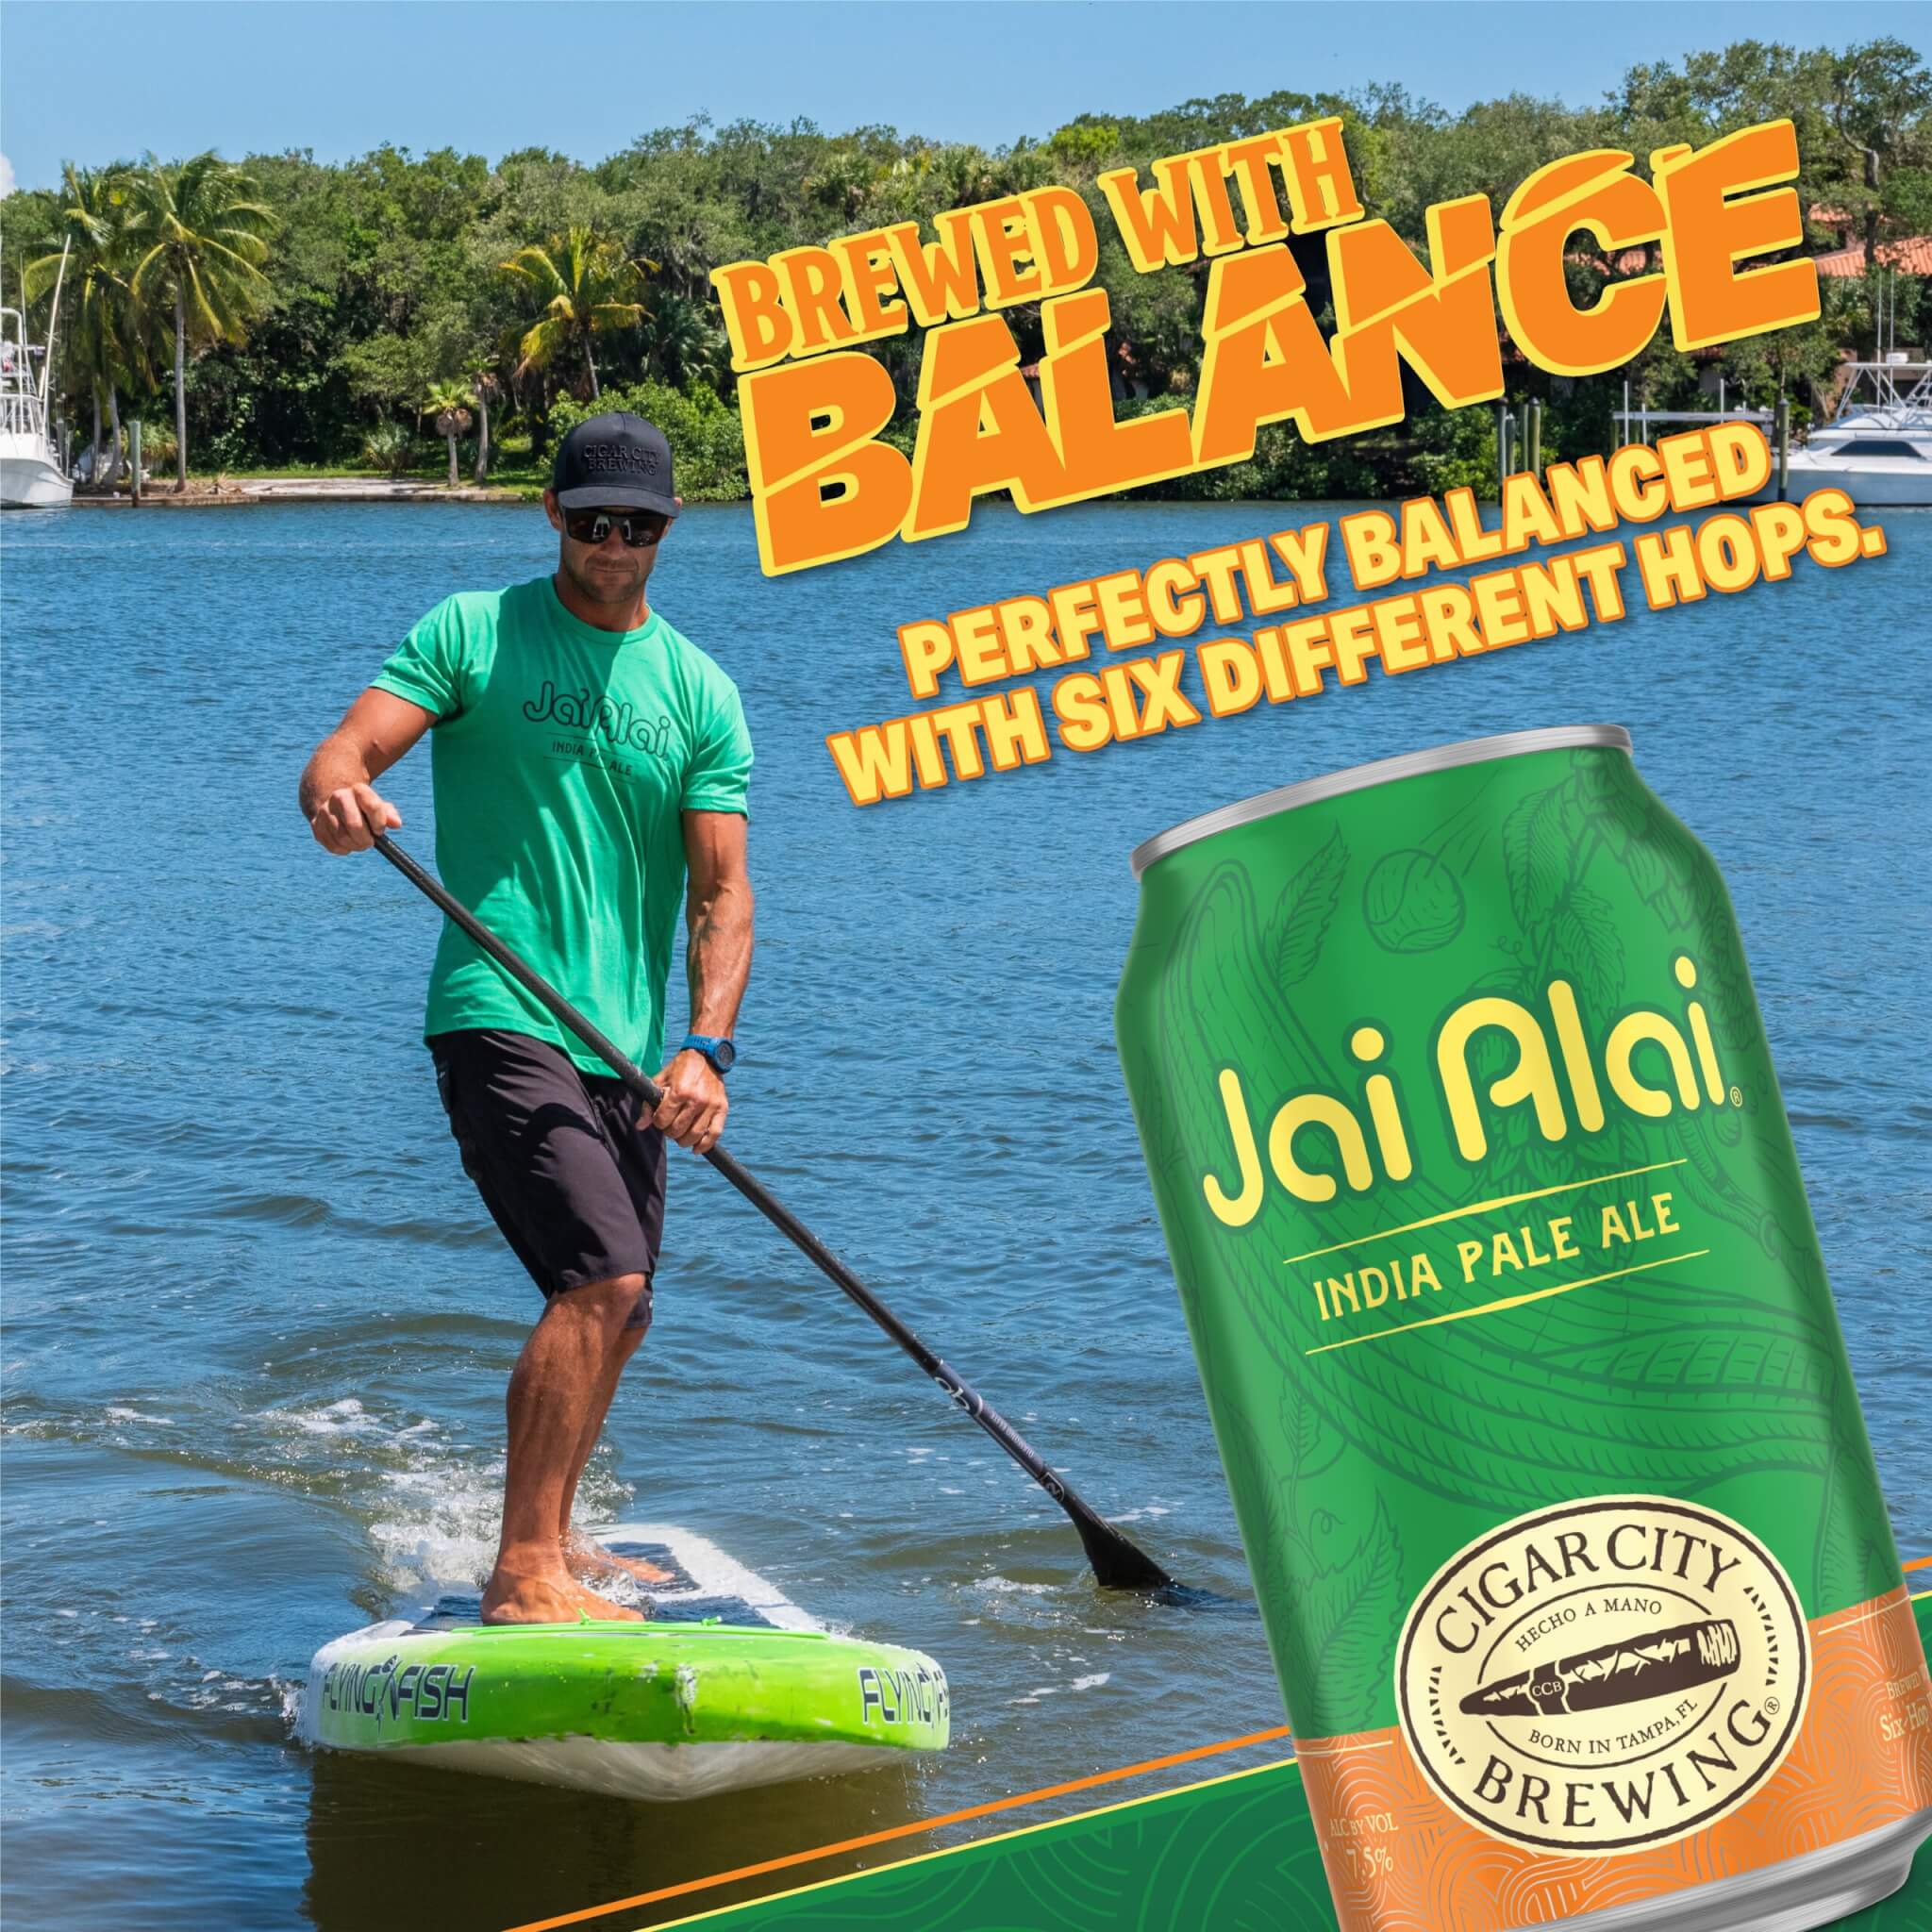 Image of a man standing on a Stand Up Paddleboard next to overlaid text that says Brewed with Balance, perfectly balanced with six different hops and a large can of Jai Alai IPA.